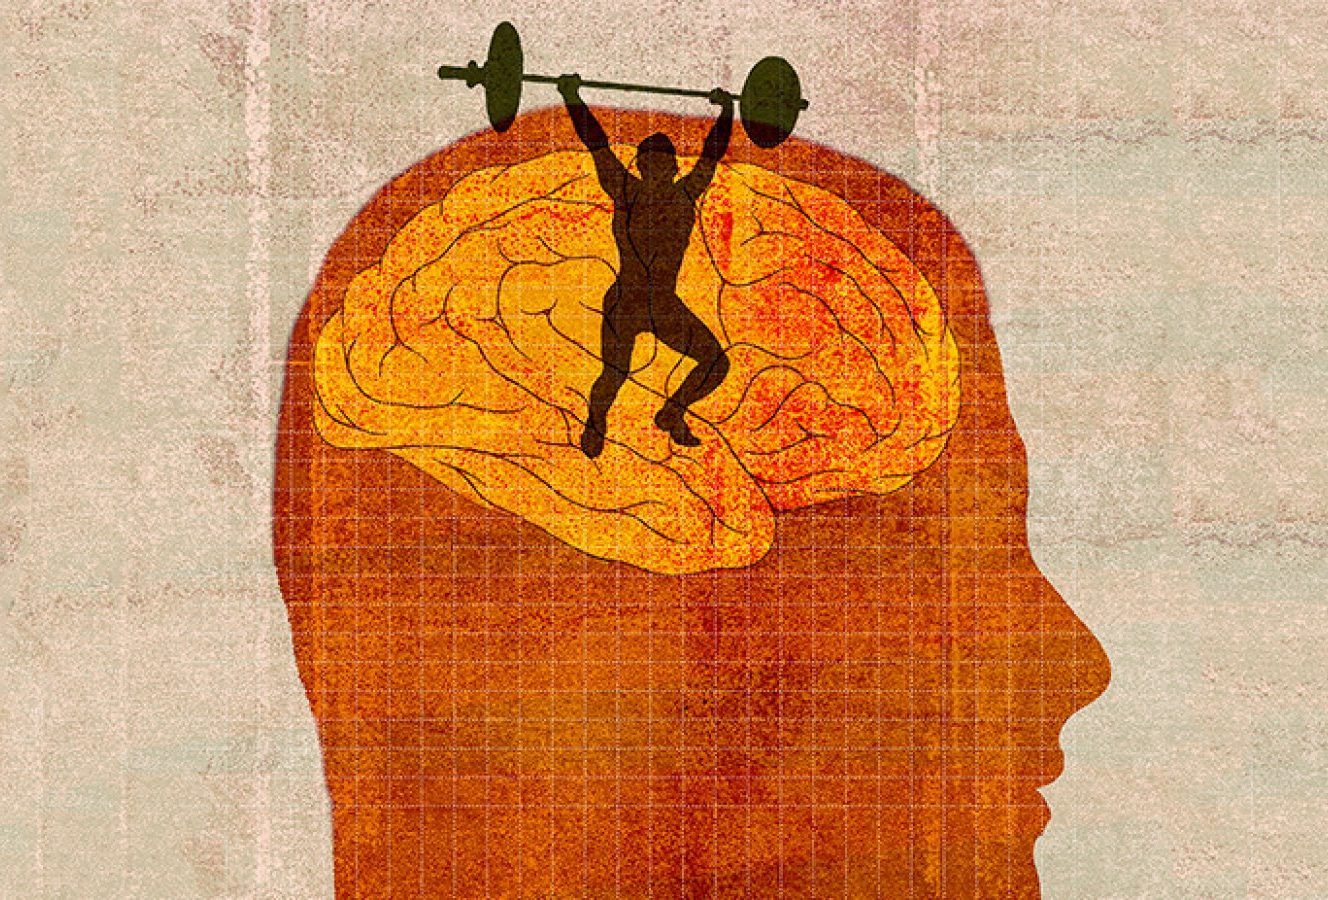 Inc: The 4 Brain Superpowers You Need to Be a Successful Leader, According to Neuroscience